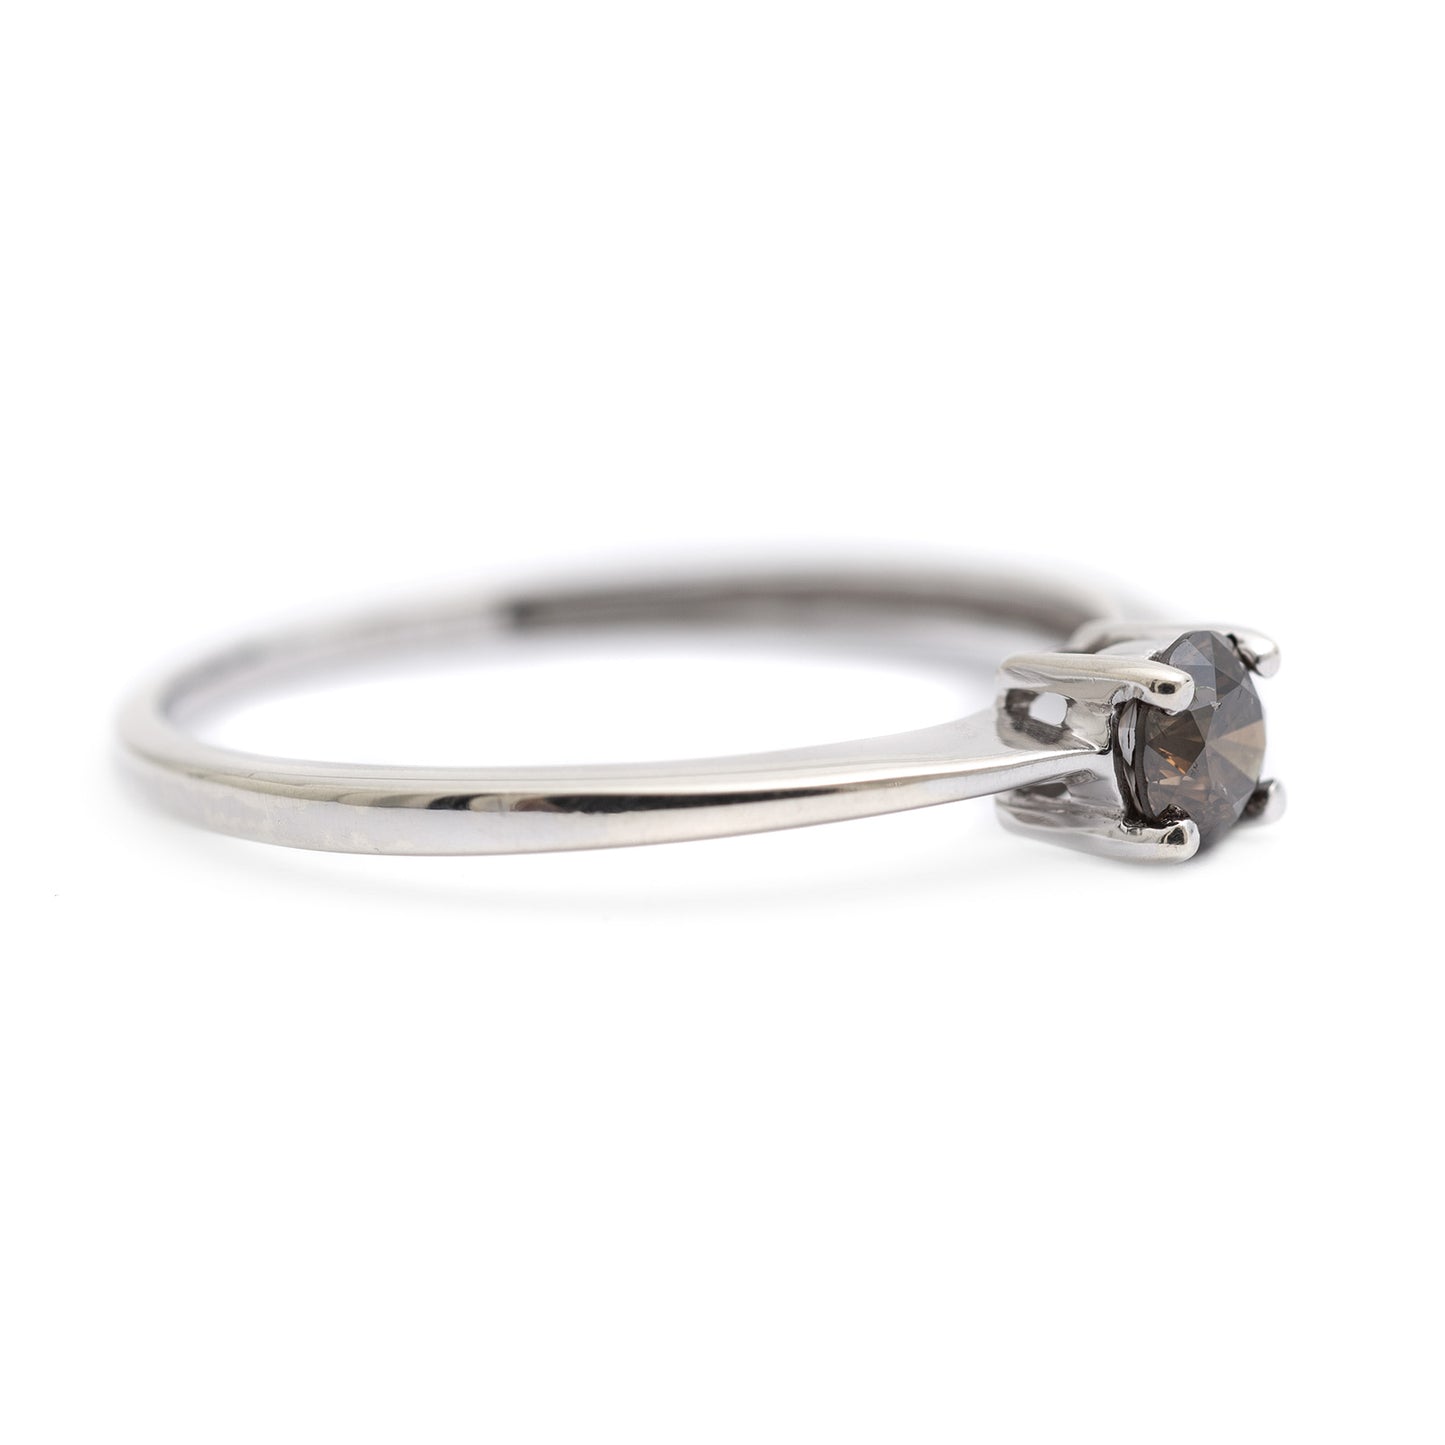 9ct White Gold & Cognac Diamond Solitaire Ring - Size N Ladies Slender Band (Code A303)